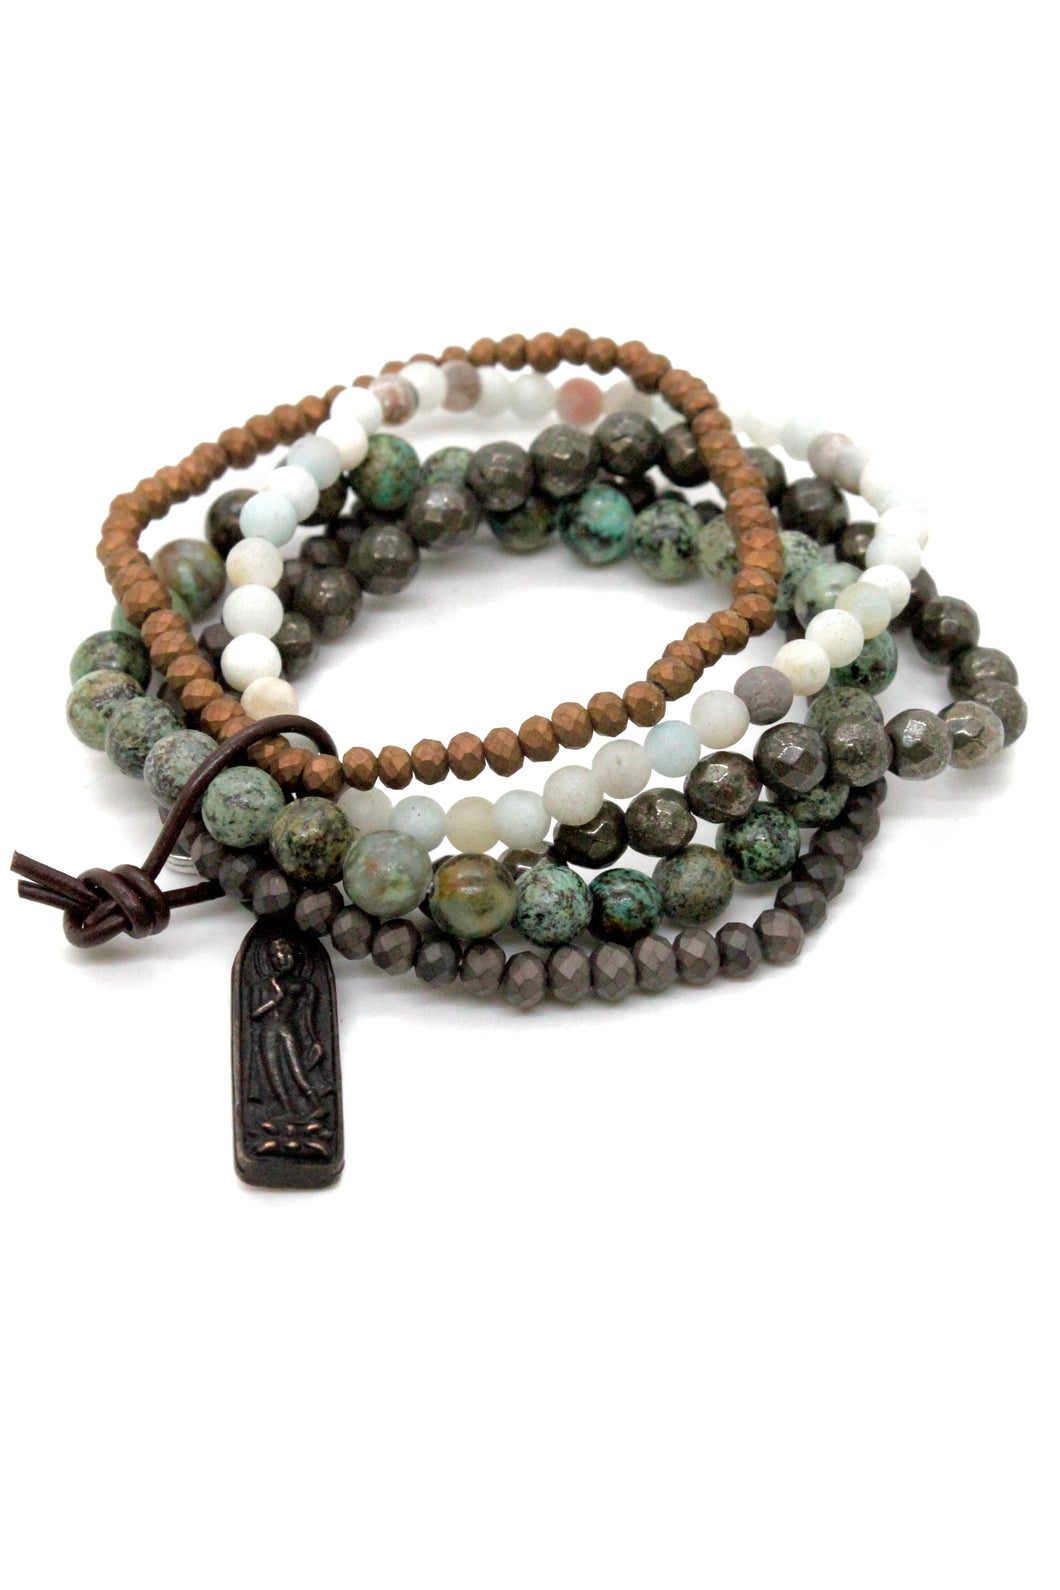 Stone and Crystal Stretch Bracelet with Mini Black Buddha BL-4019-MBB -The Buddha Collection-